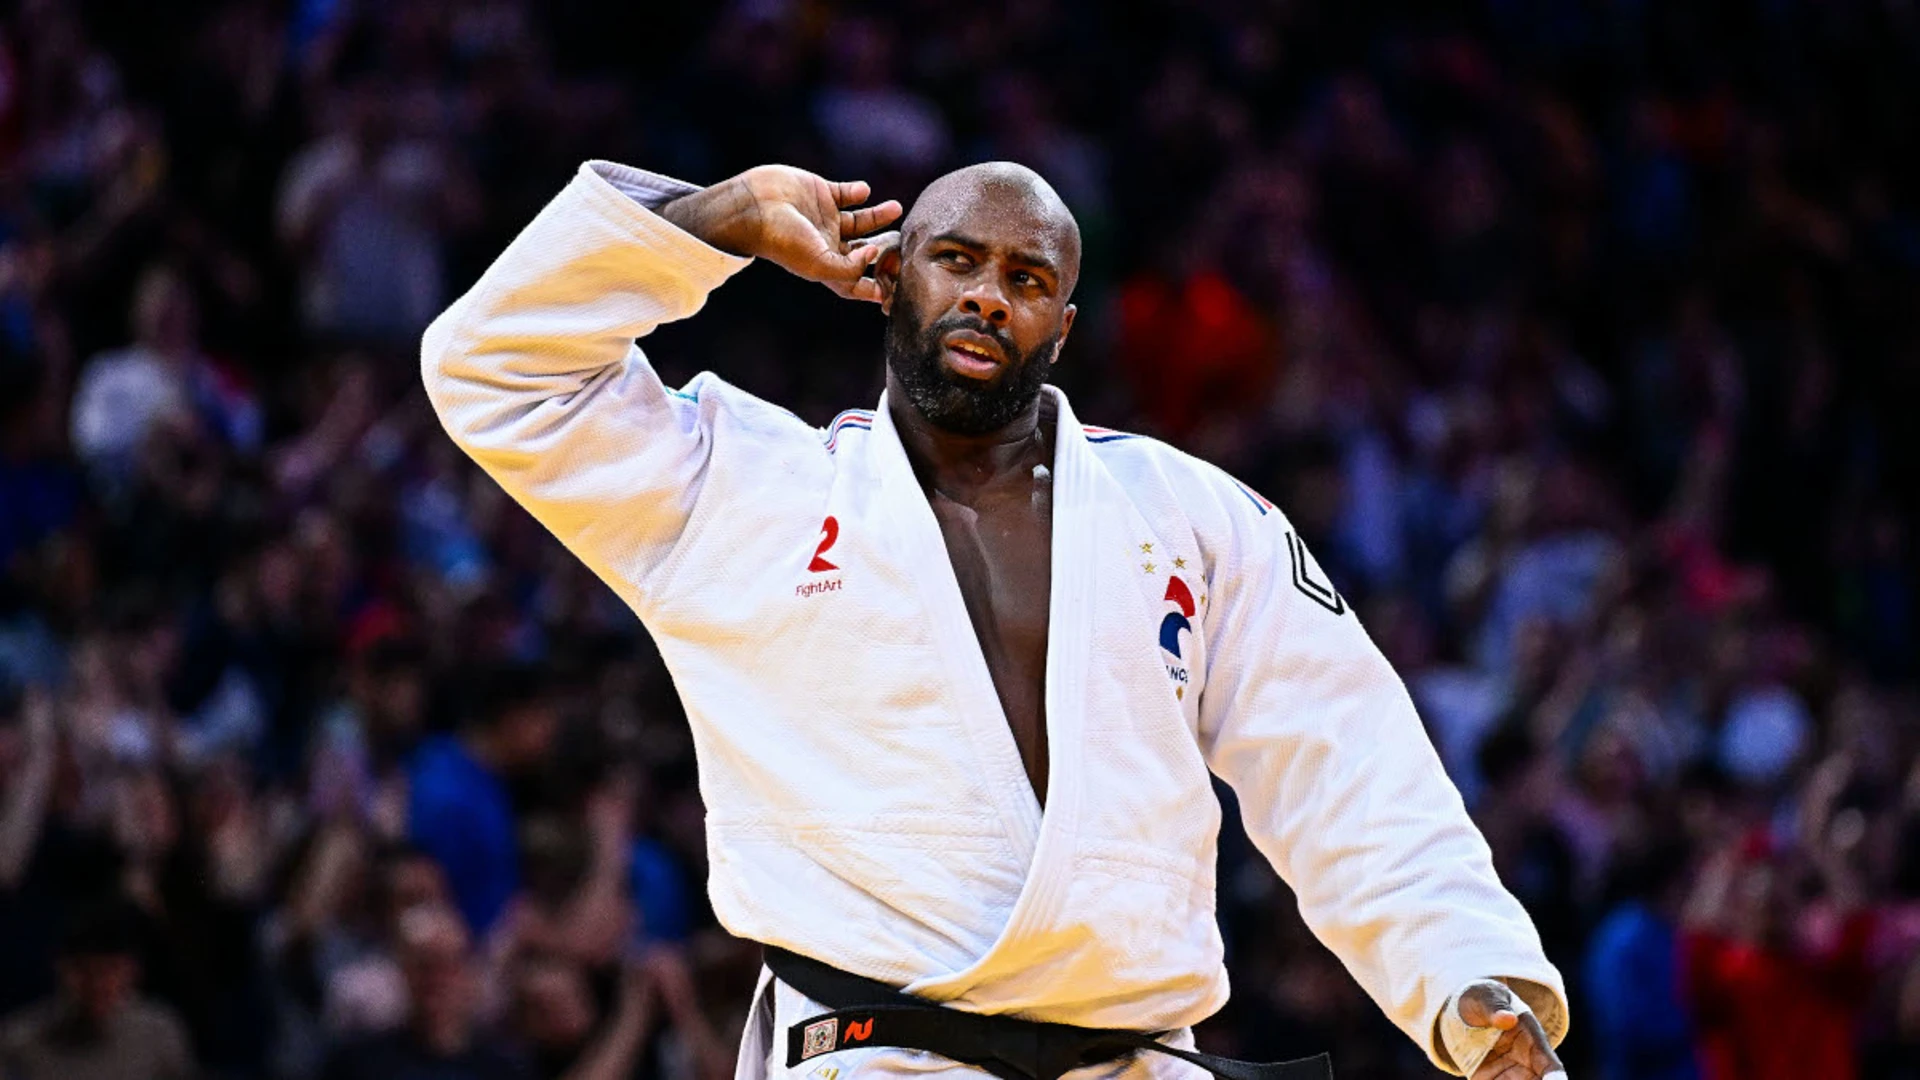 French judo star Riner eyes Olympic record in Paris